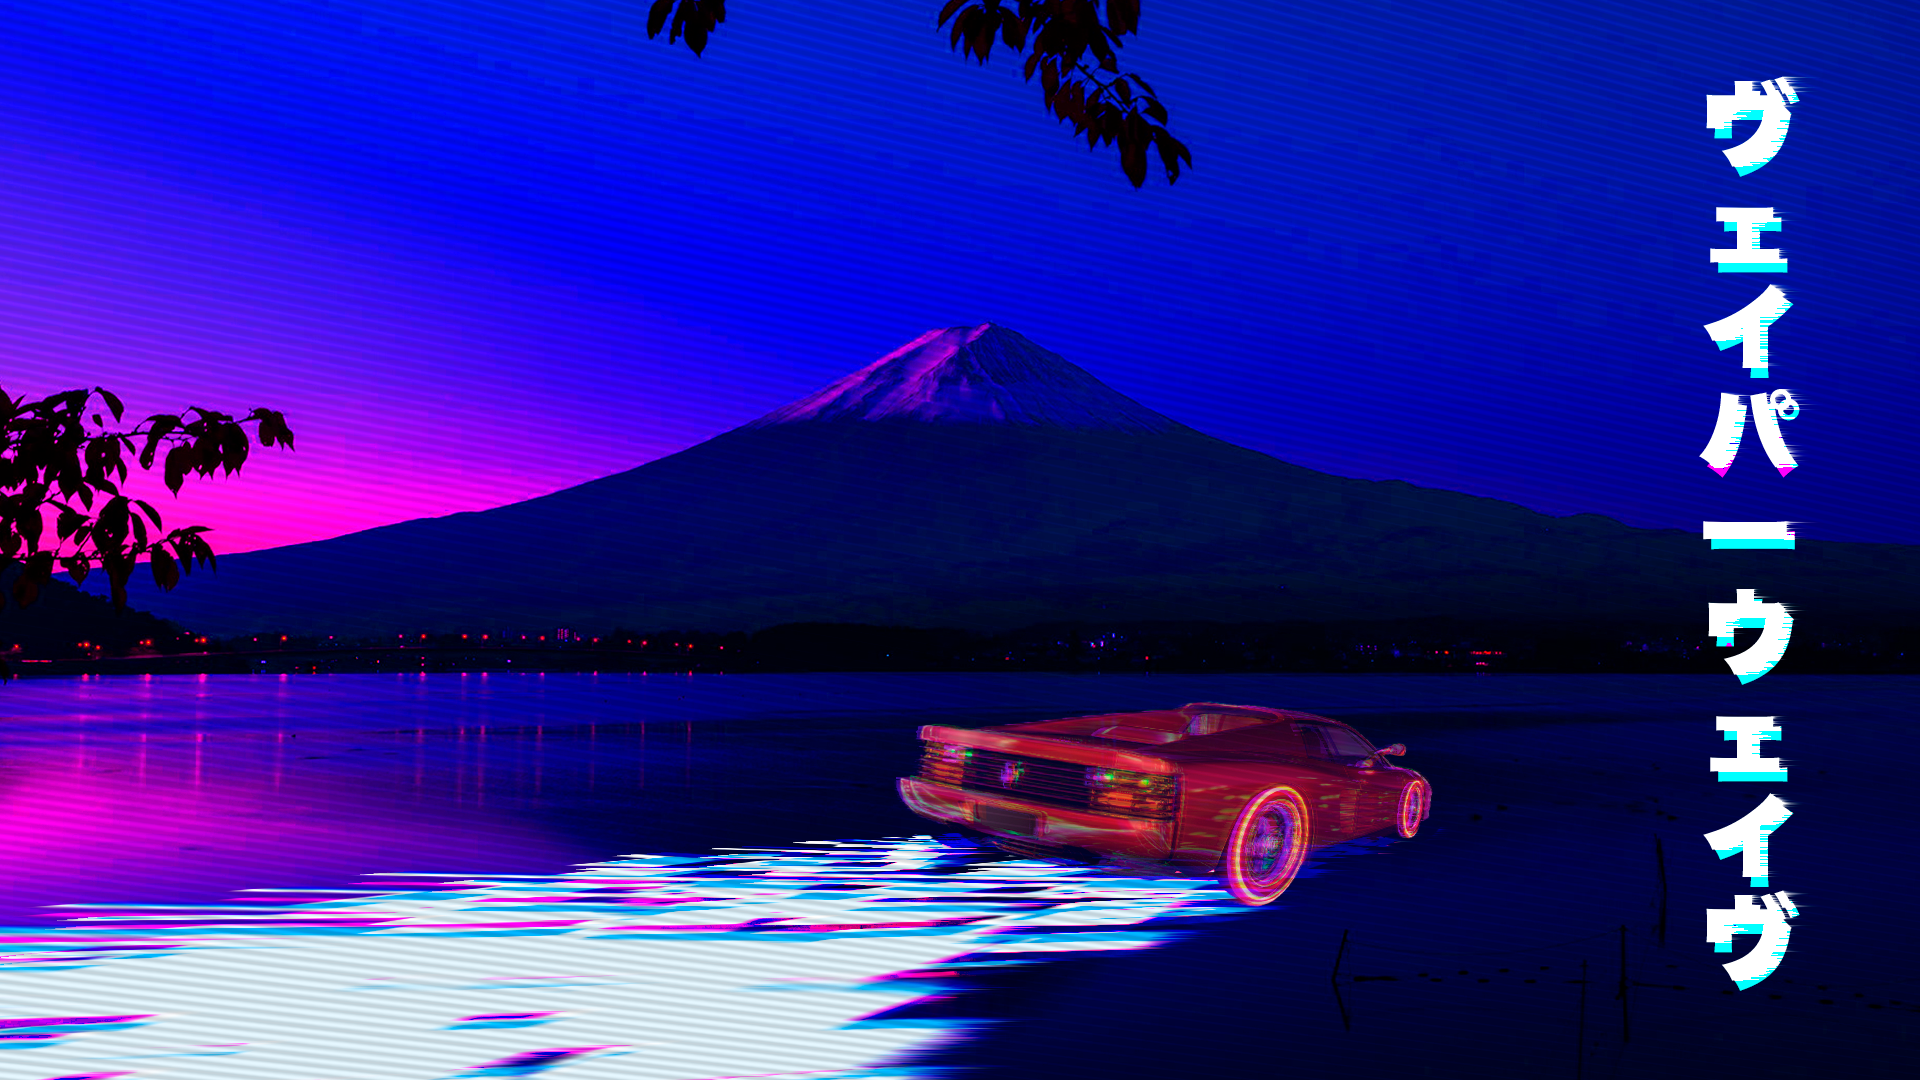 Spent a couple hours making this vaporwave wallpaper for a friend